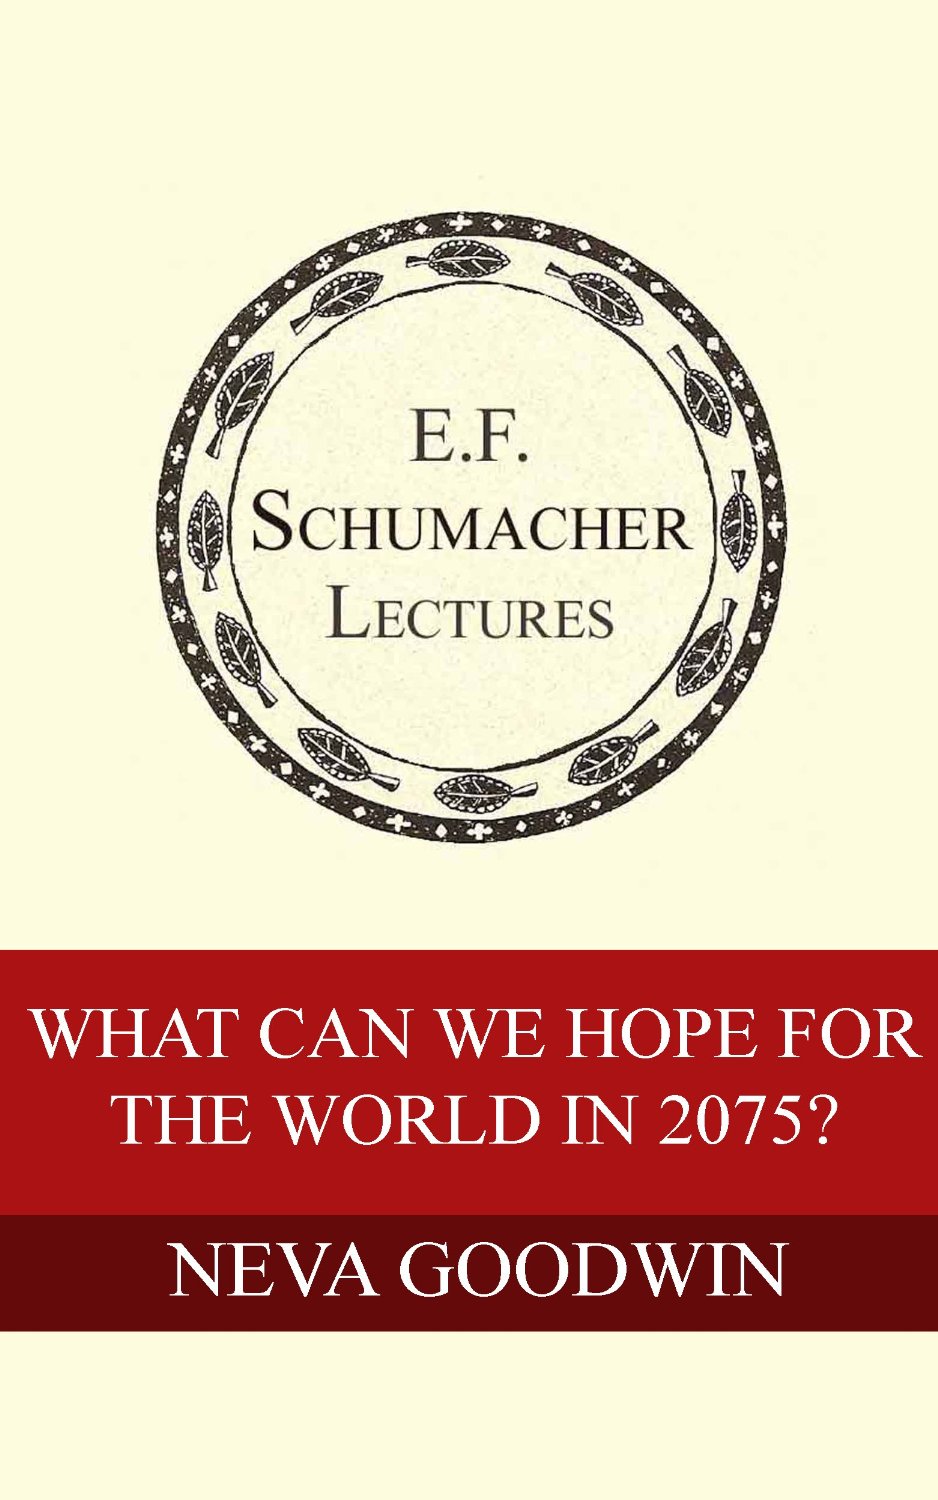 What Can We Hope for the World in 2075? (Neva Goodwin, Hildegarde Hannum)